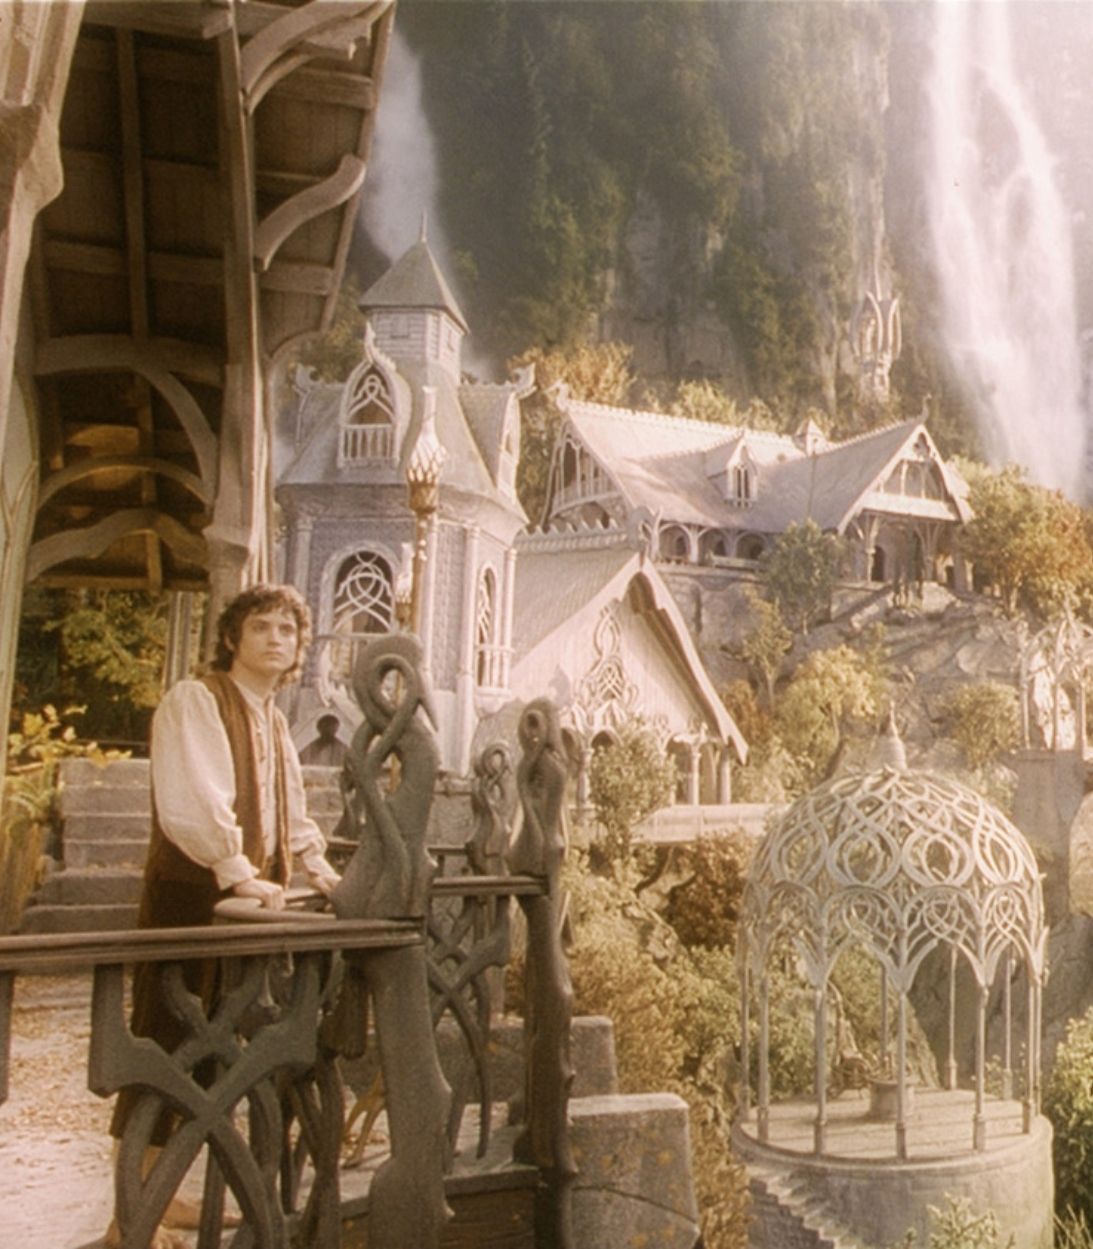 Lord-of-the-Rings-Rivendell-1093